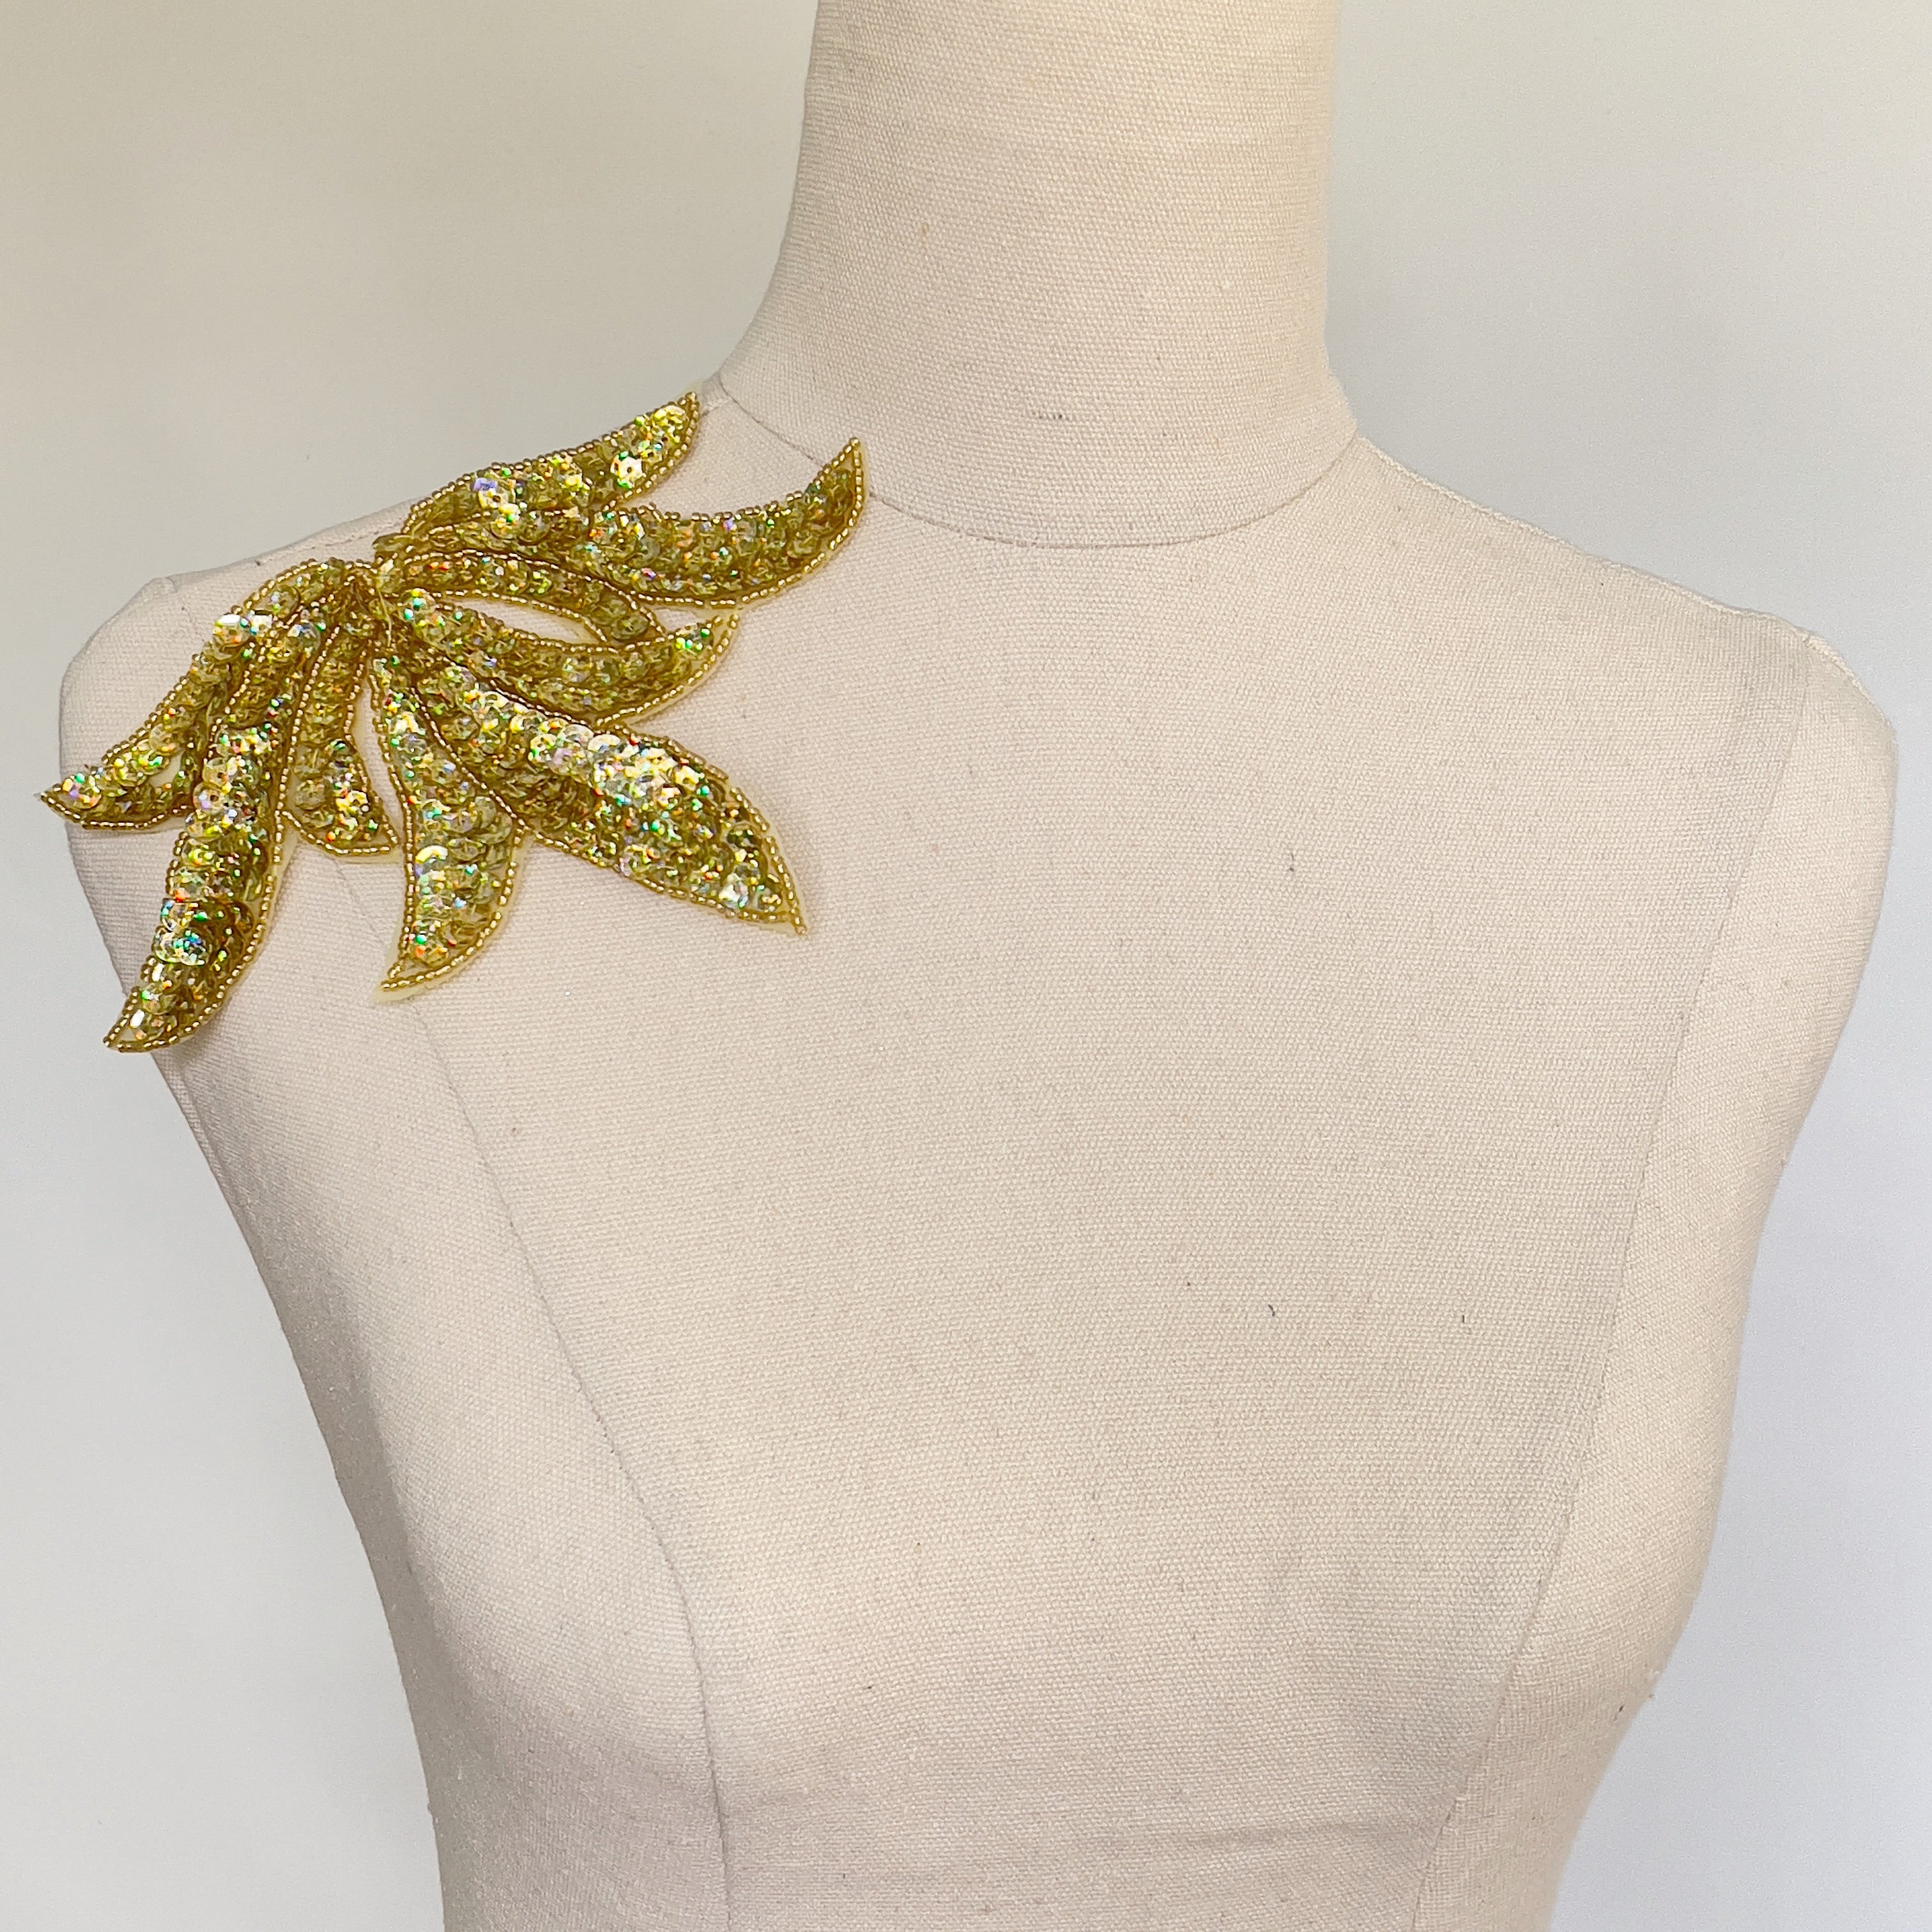 Leaf shaped applique filled with gold sequins and displayed on a mannequin.